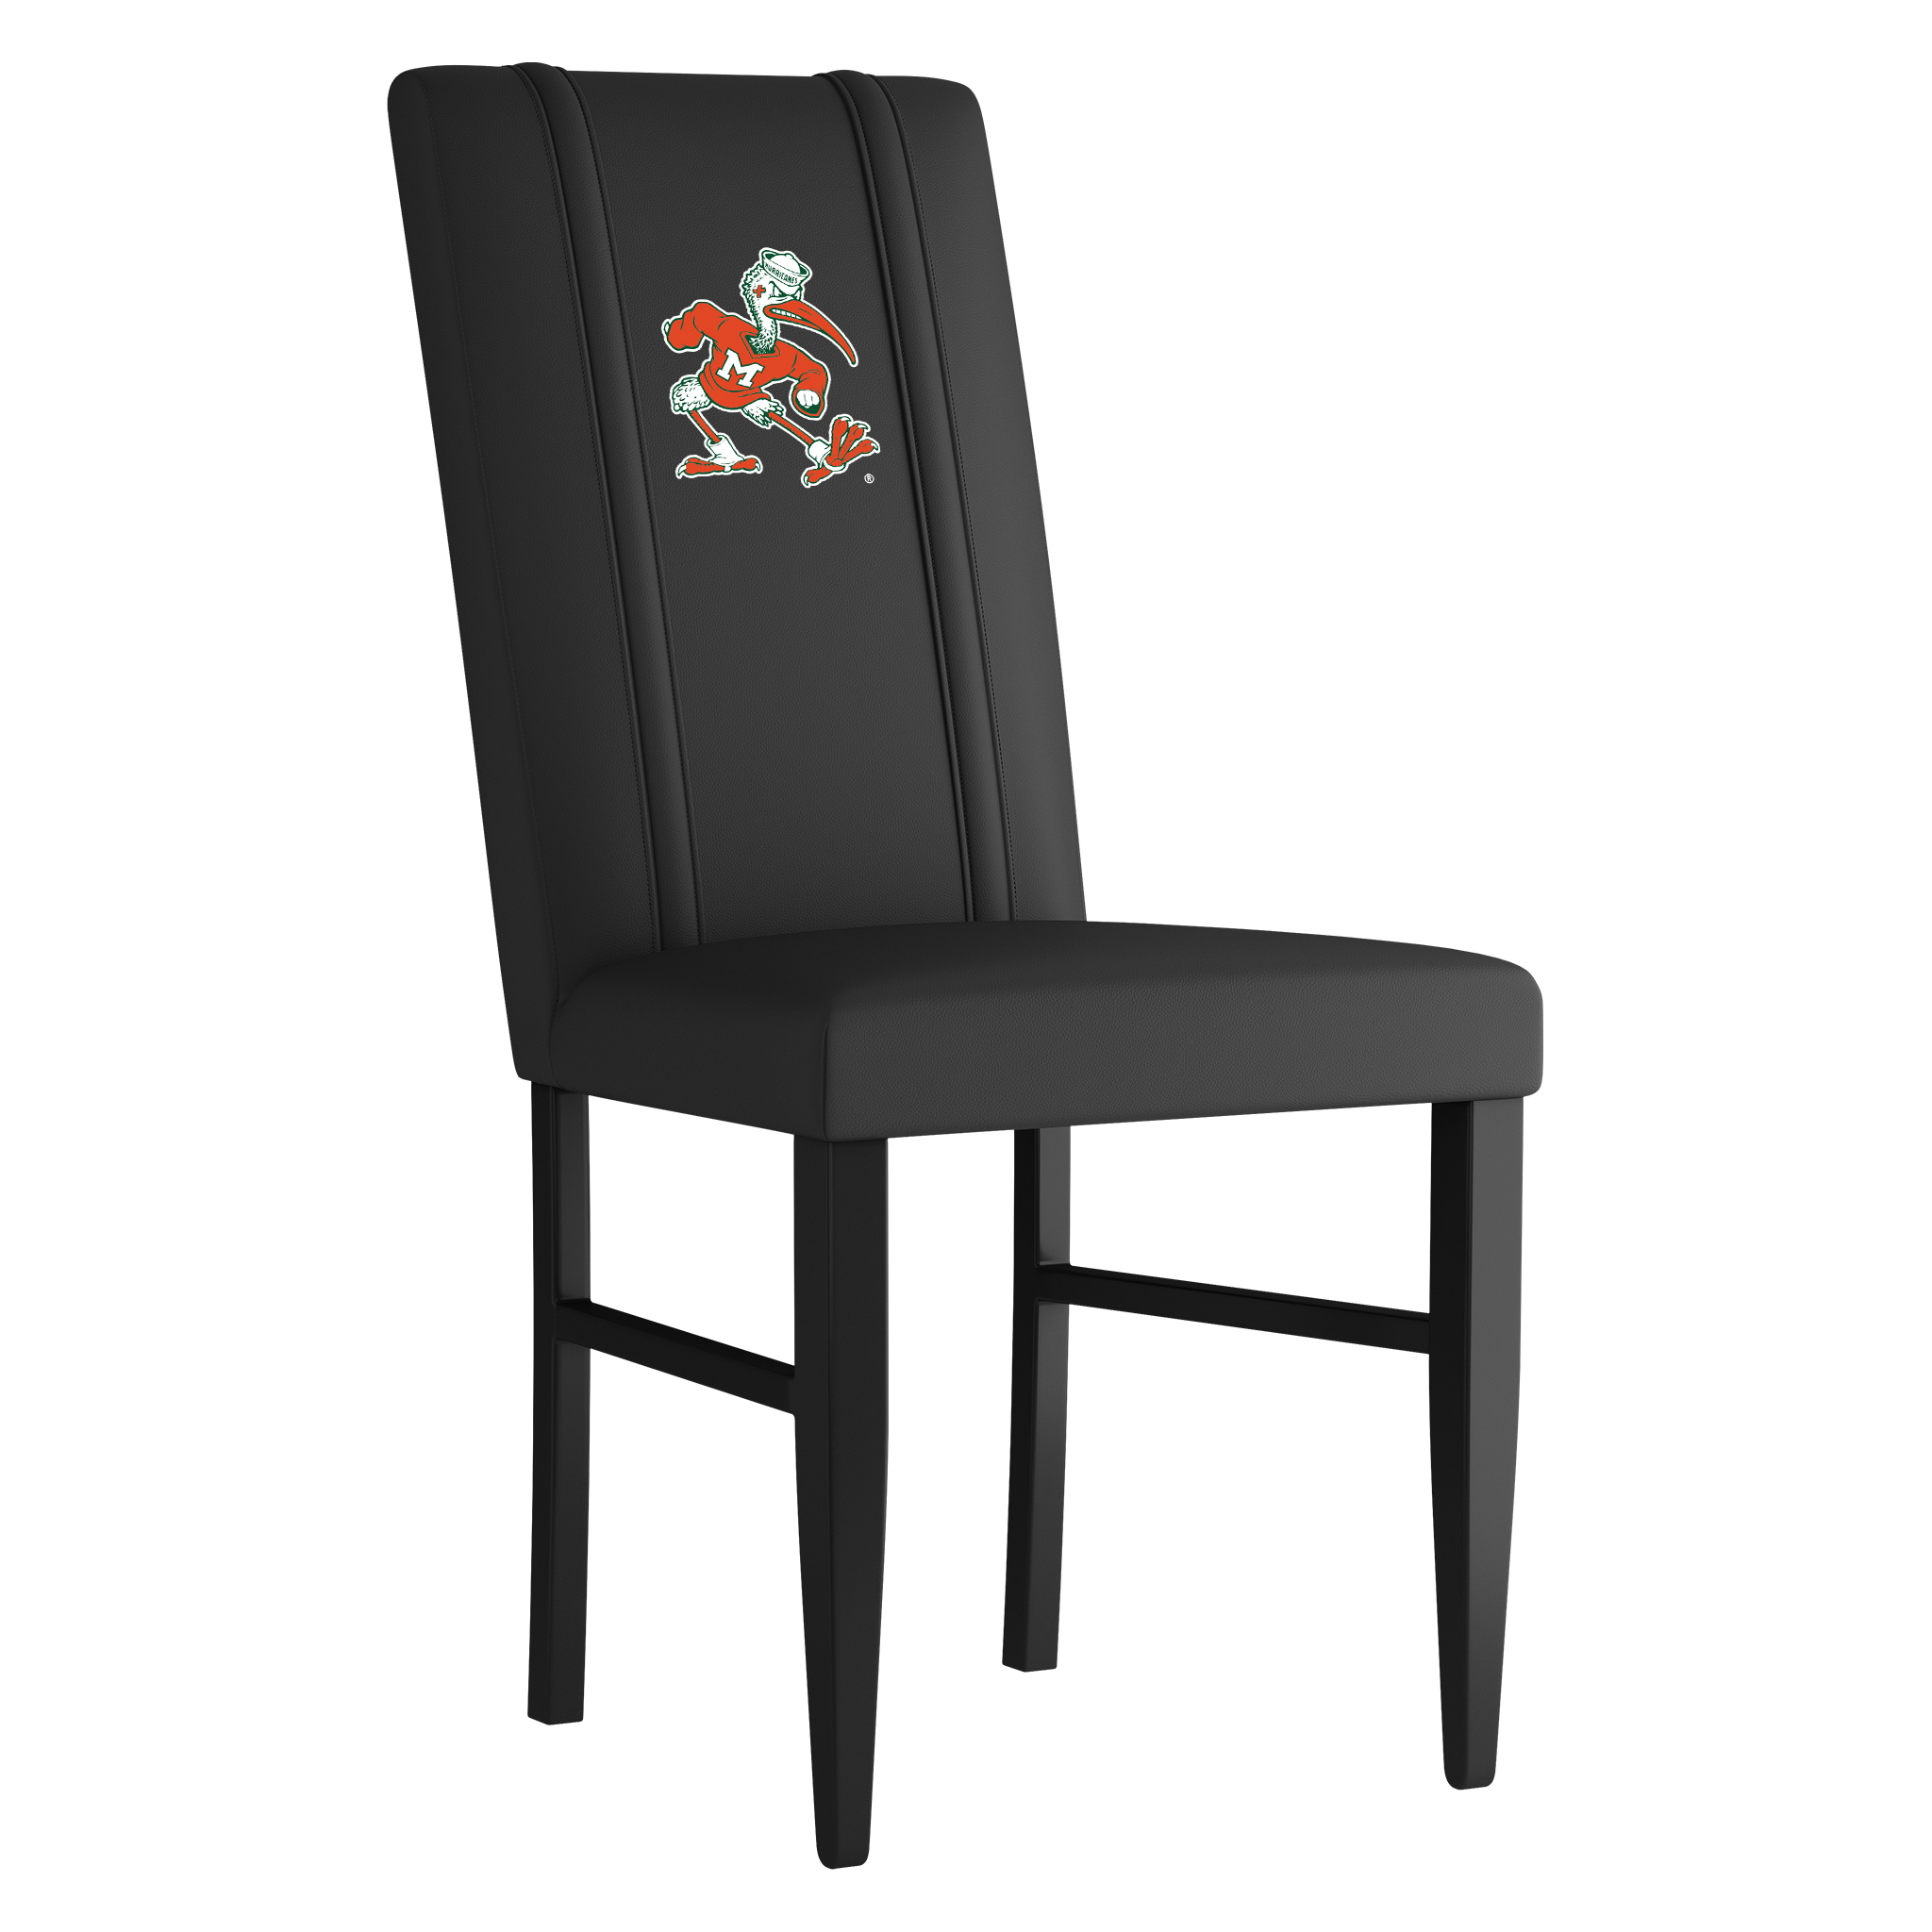 Miami Hurricanes Side Chair 2000 With Miami Hurricanes Secondary Logo